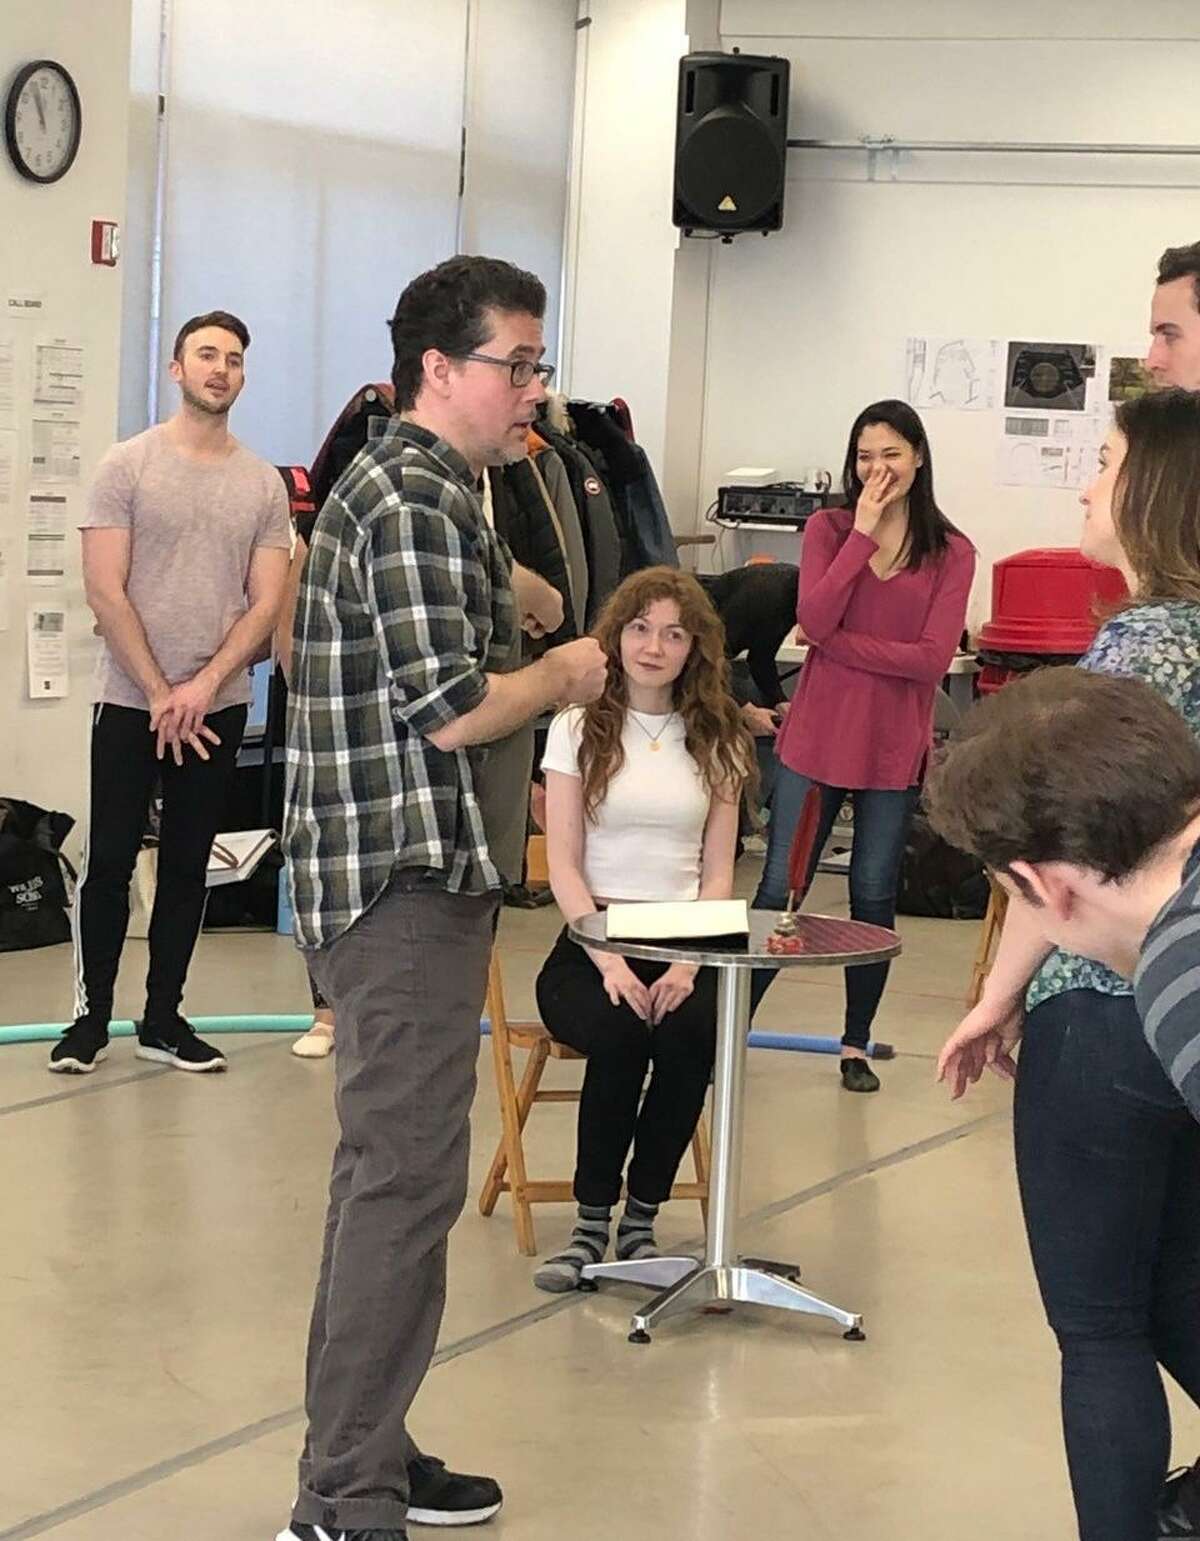 Actors rehearse in New York City for “Austen’s Pride, a new musical of Pride and Prejudice,” which will premiere in Ridgefield at ACT (A Contemporary Theatre) of Connecticut. The show runs March 30 through April 14.